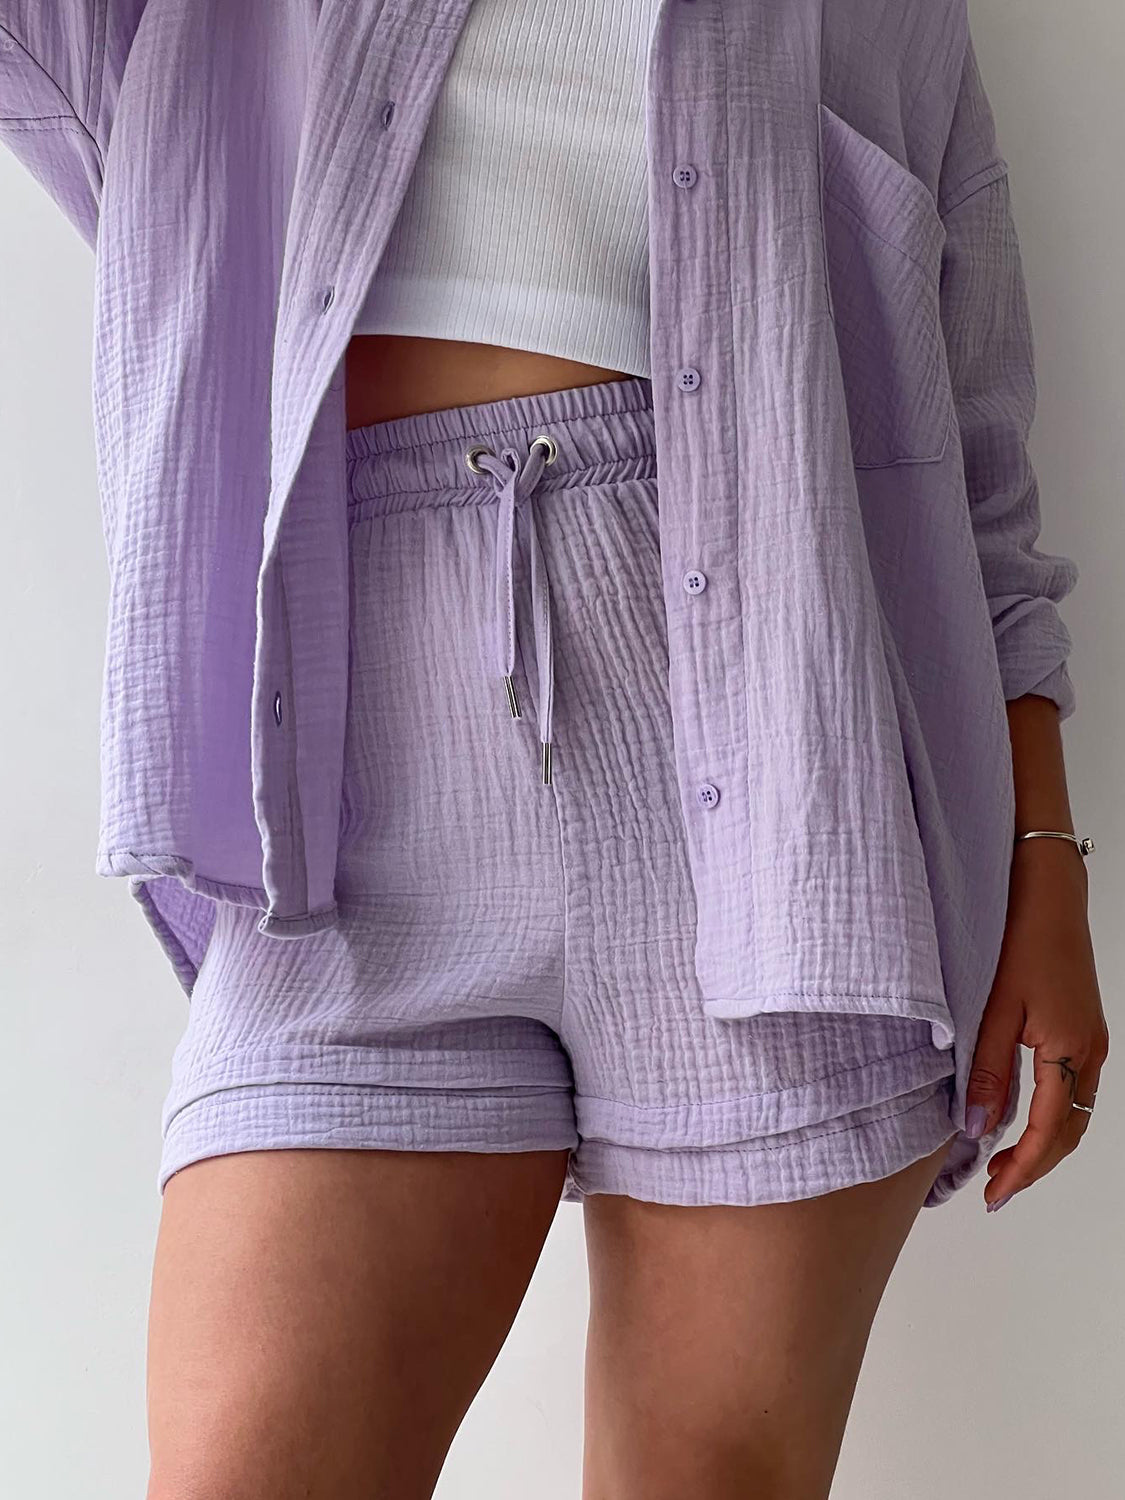 Outfit Set - Texture Button Up Shirt and Drawstring Shorts (11 Colors up to 2XL)